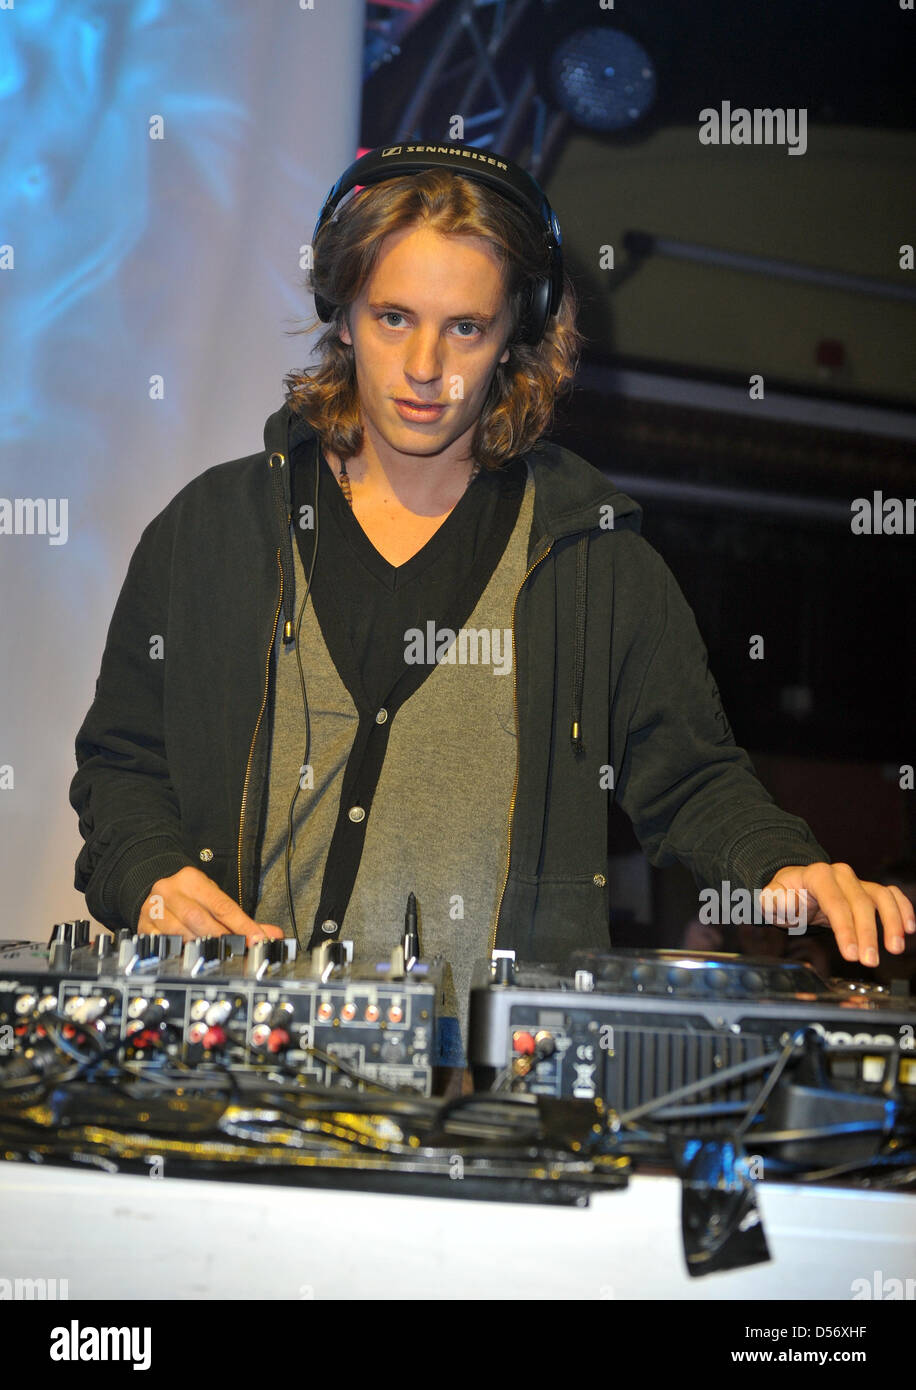 Pierre Sarkozy, son of French President Nicolas Sarkozy, 'on the decks' during his performance as dj withtin the scope of the 'Lambertz Monday Night - Schoko & Fashion' at the Alte Wartesaal in Cologne, Germany, 02 February 2010. The Lambertz party is traditionally held on the sidelines of the International Sweets Fair ('Internationale Suesswaren Messe'). Photo: Joerg Carstensen Stock Photo